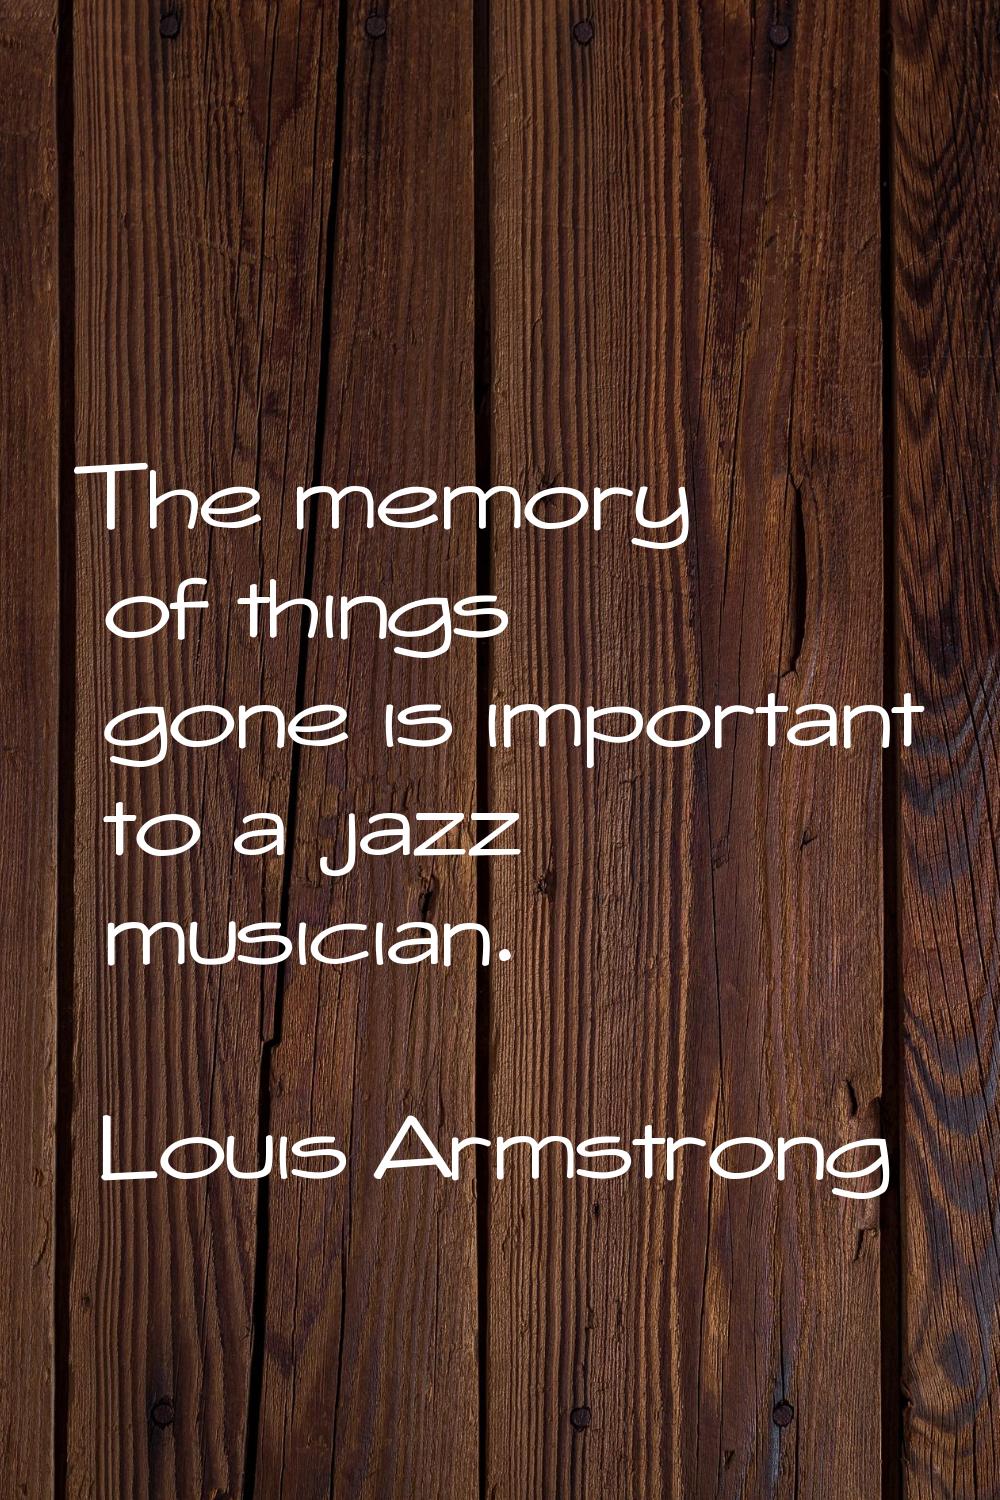 The memory of things gone is important to a jazz musician.